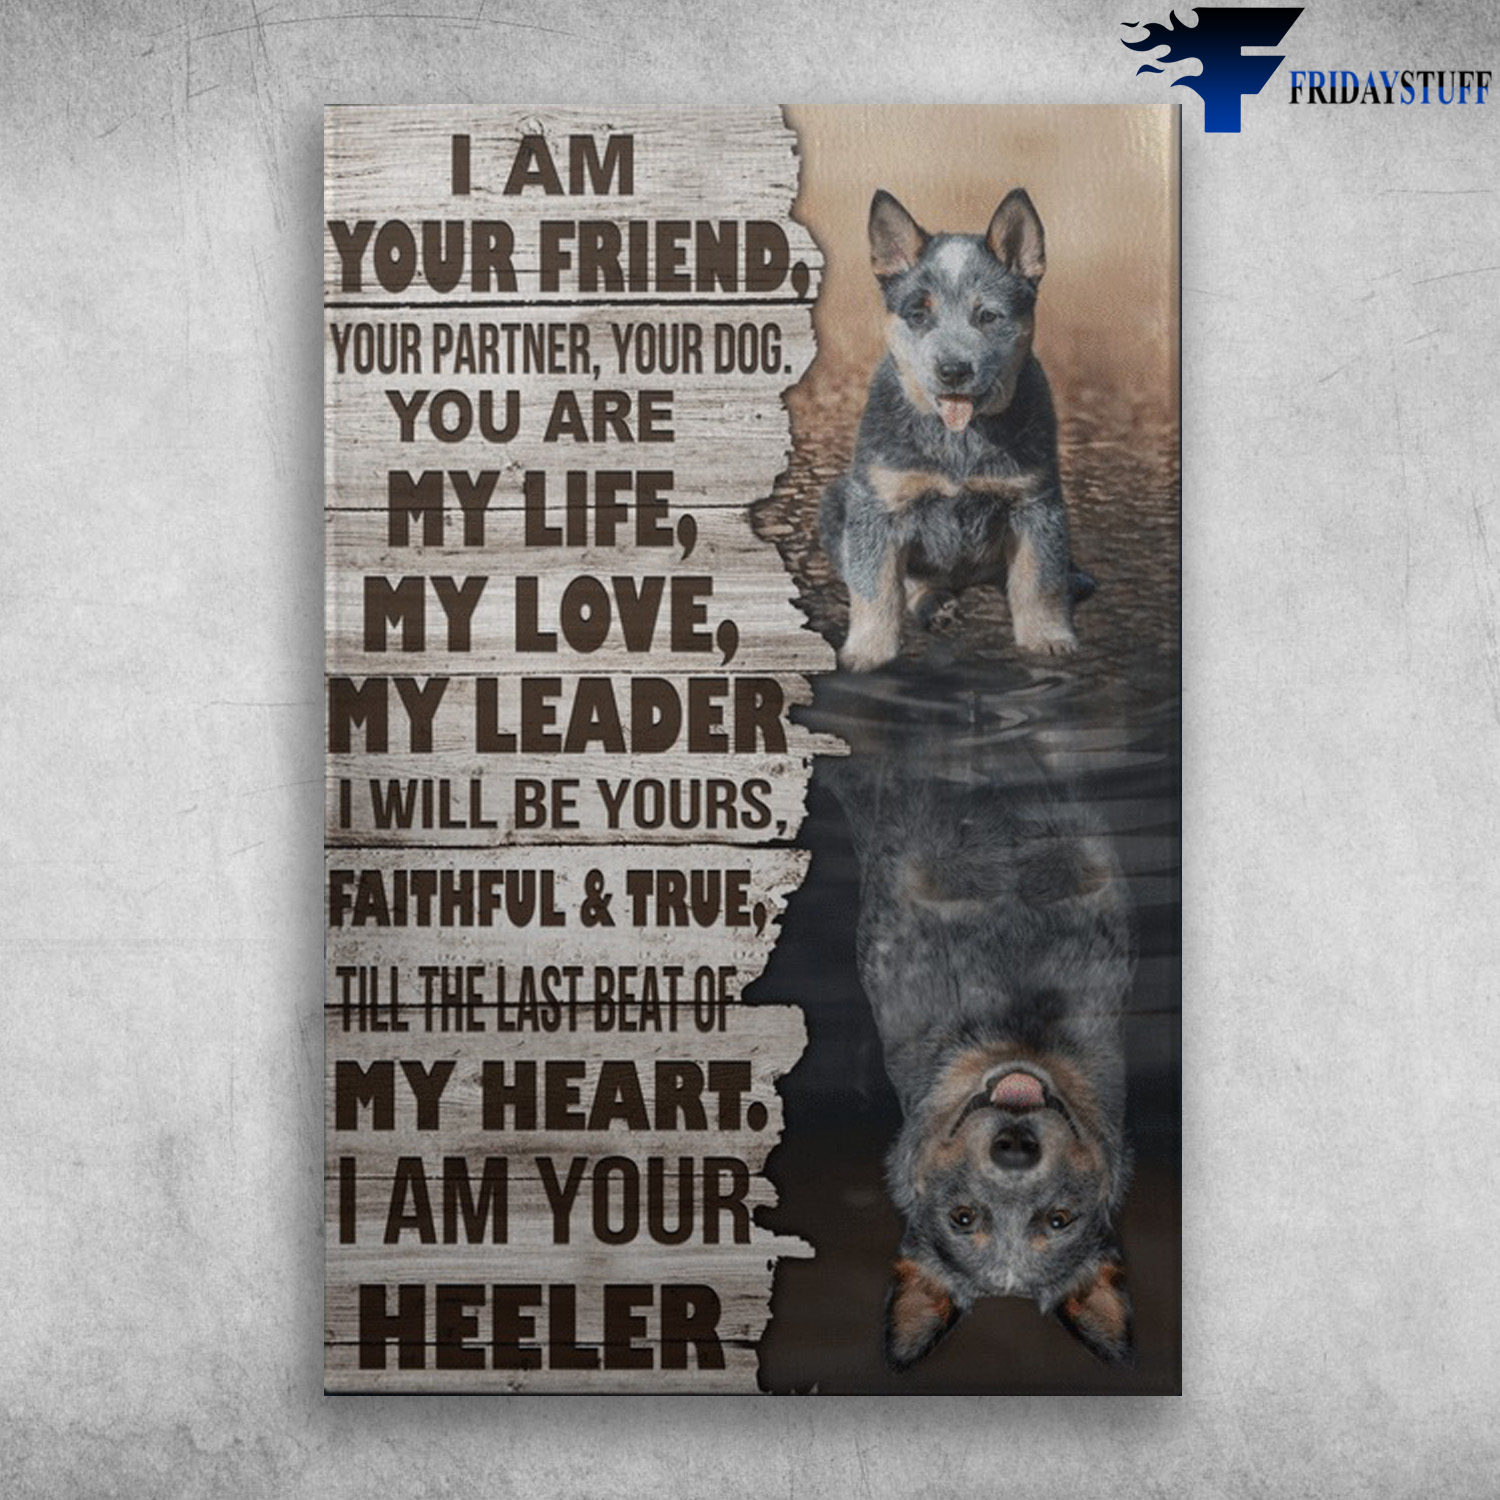 Blue Heeler - I Am Your Friend, Your Partner, Your Dog, You Are My Life, My Love, My Leader, I Will Be Yours Faithful And True, Till The Last Beat Of My Heart, I Am Your Heeler